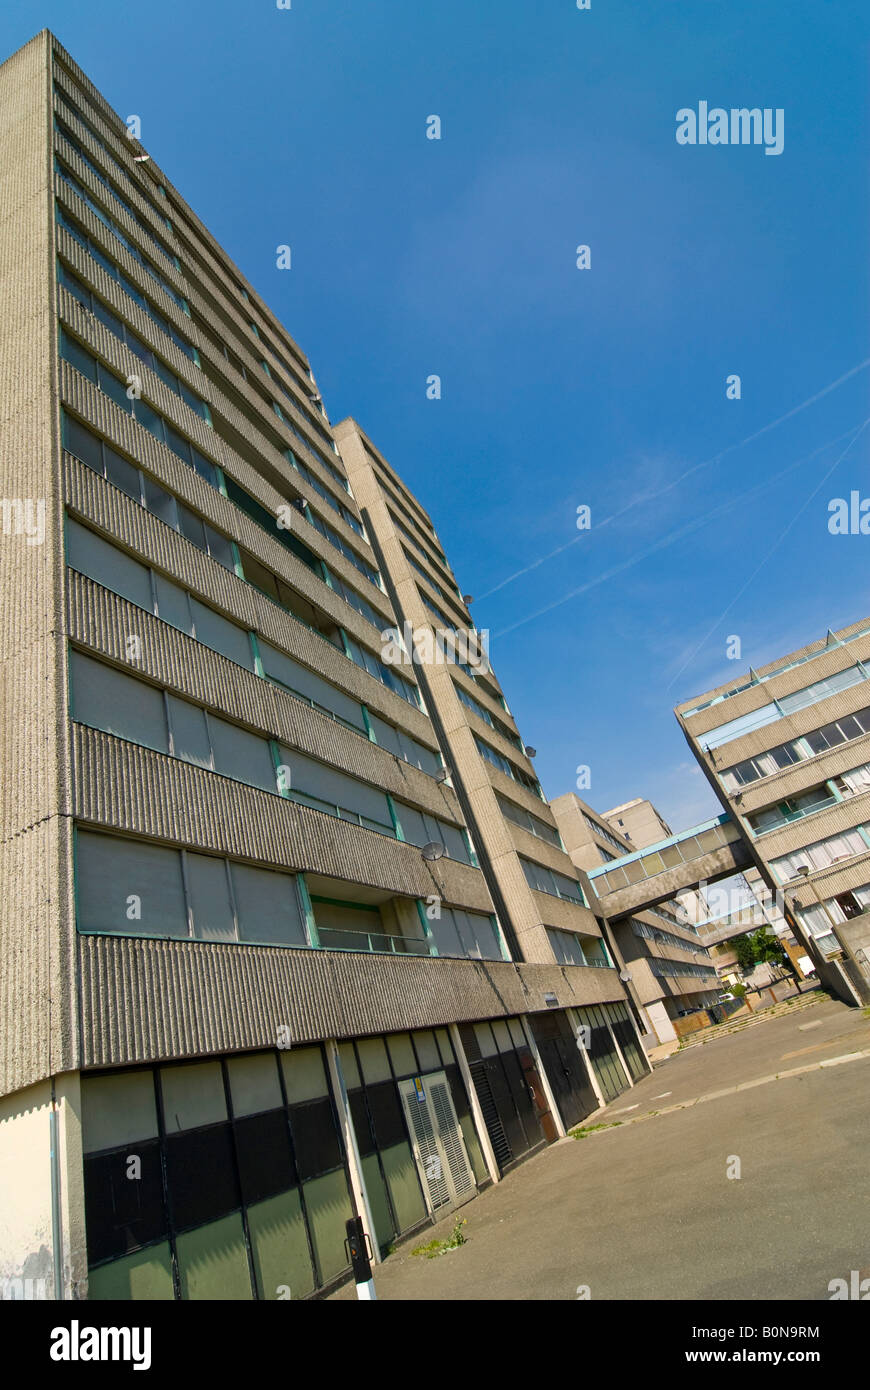 Vertical wide angle of an empty tower block on the Ferrier Estate in Kidbrooke Park on a bright sunny day. Stock Photo